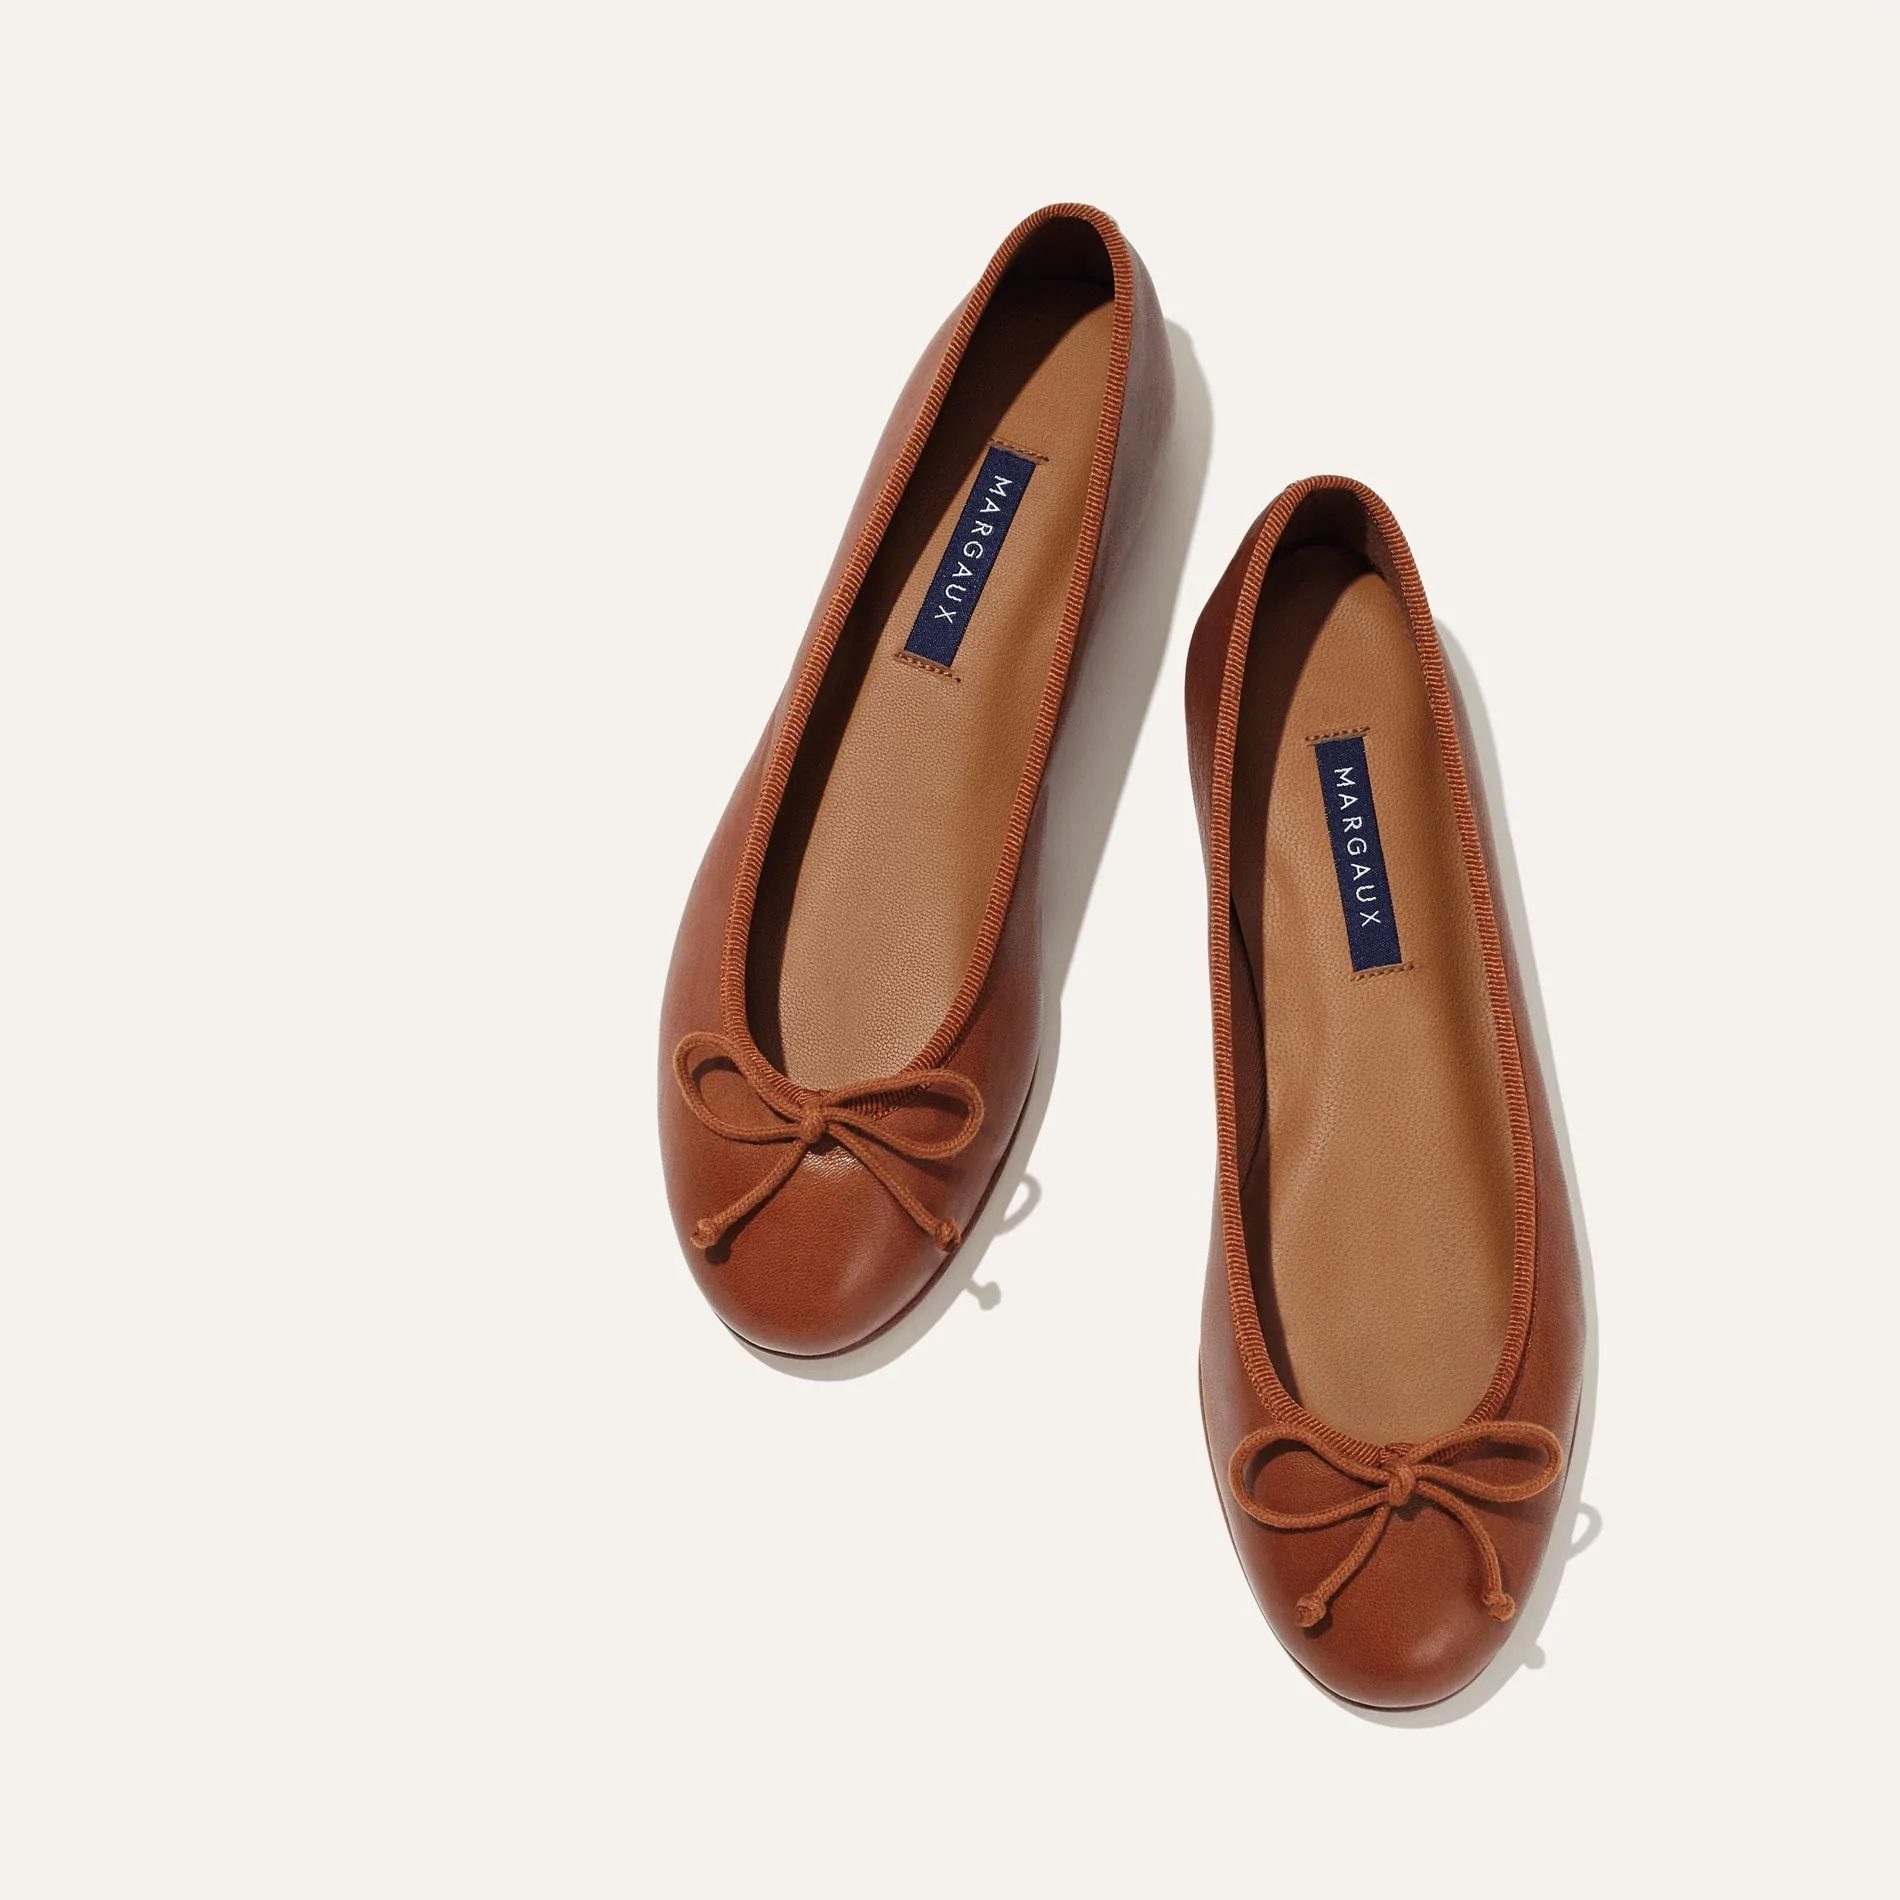 Demi Ballet Flat from Margaux